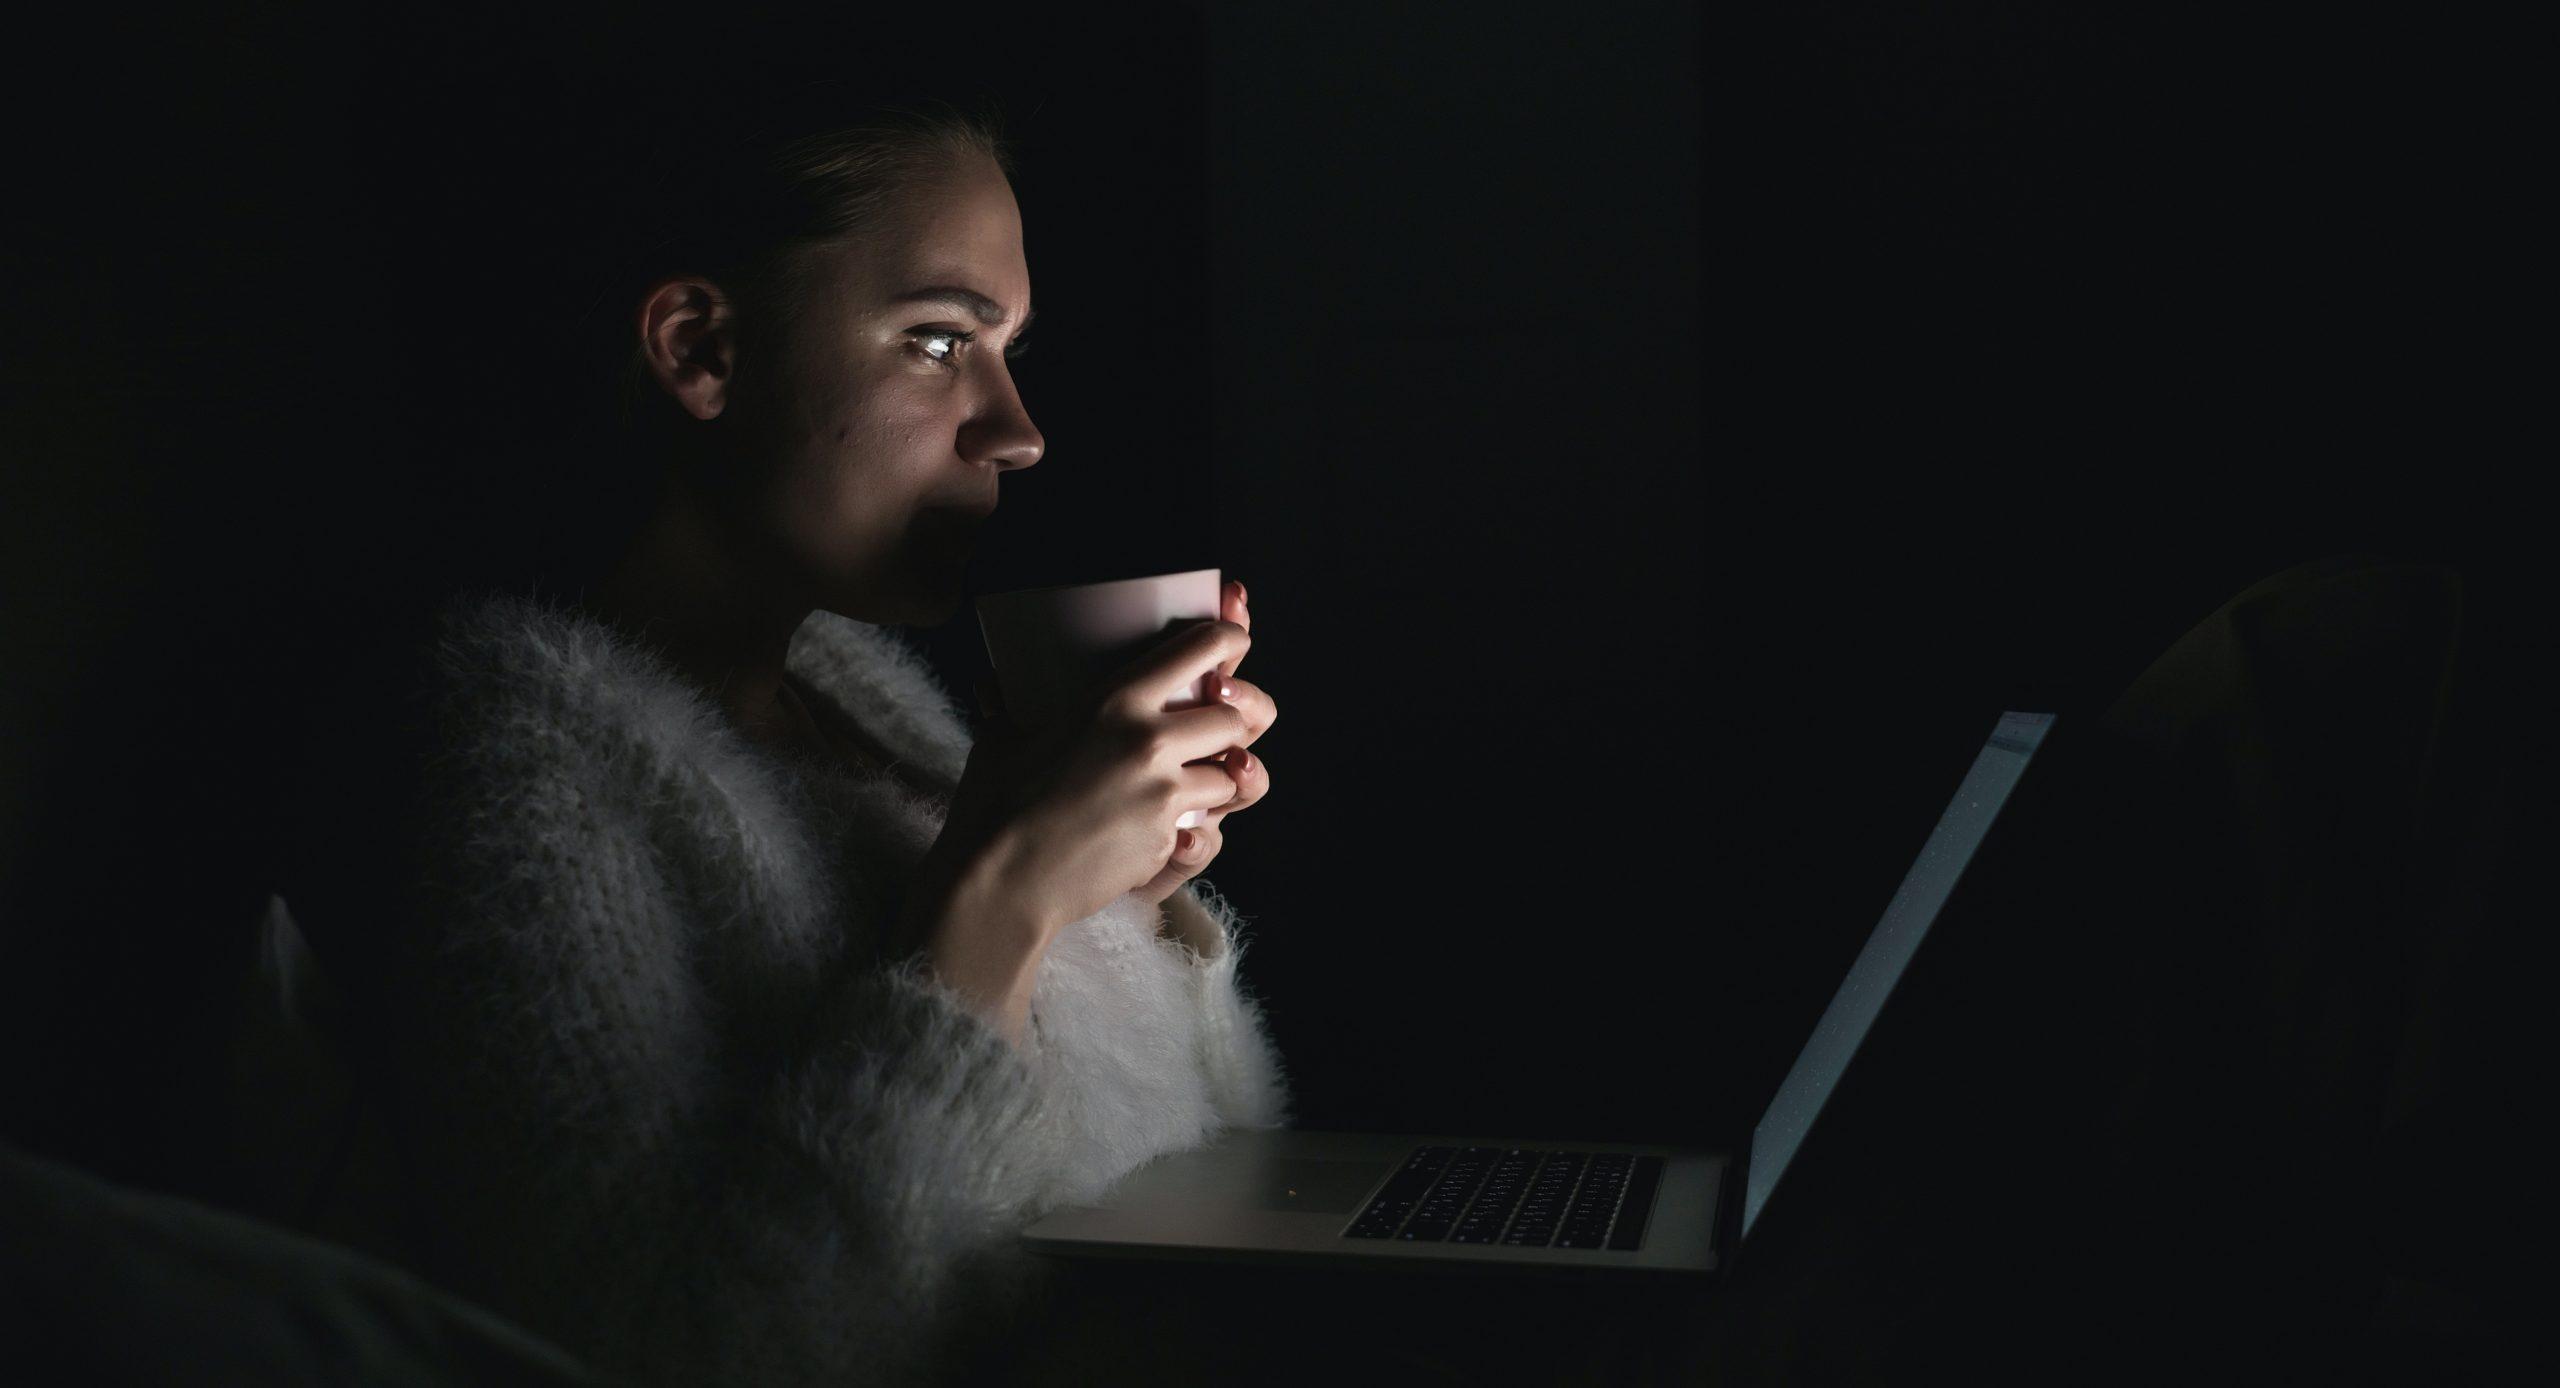 Woman holding a cup while staring at a laptop in a dark setting.